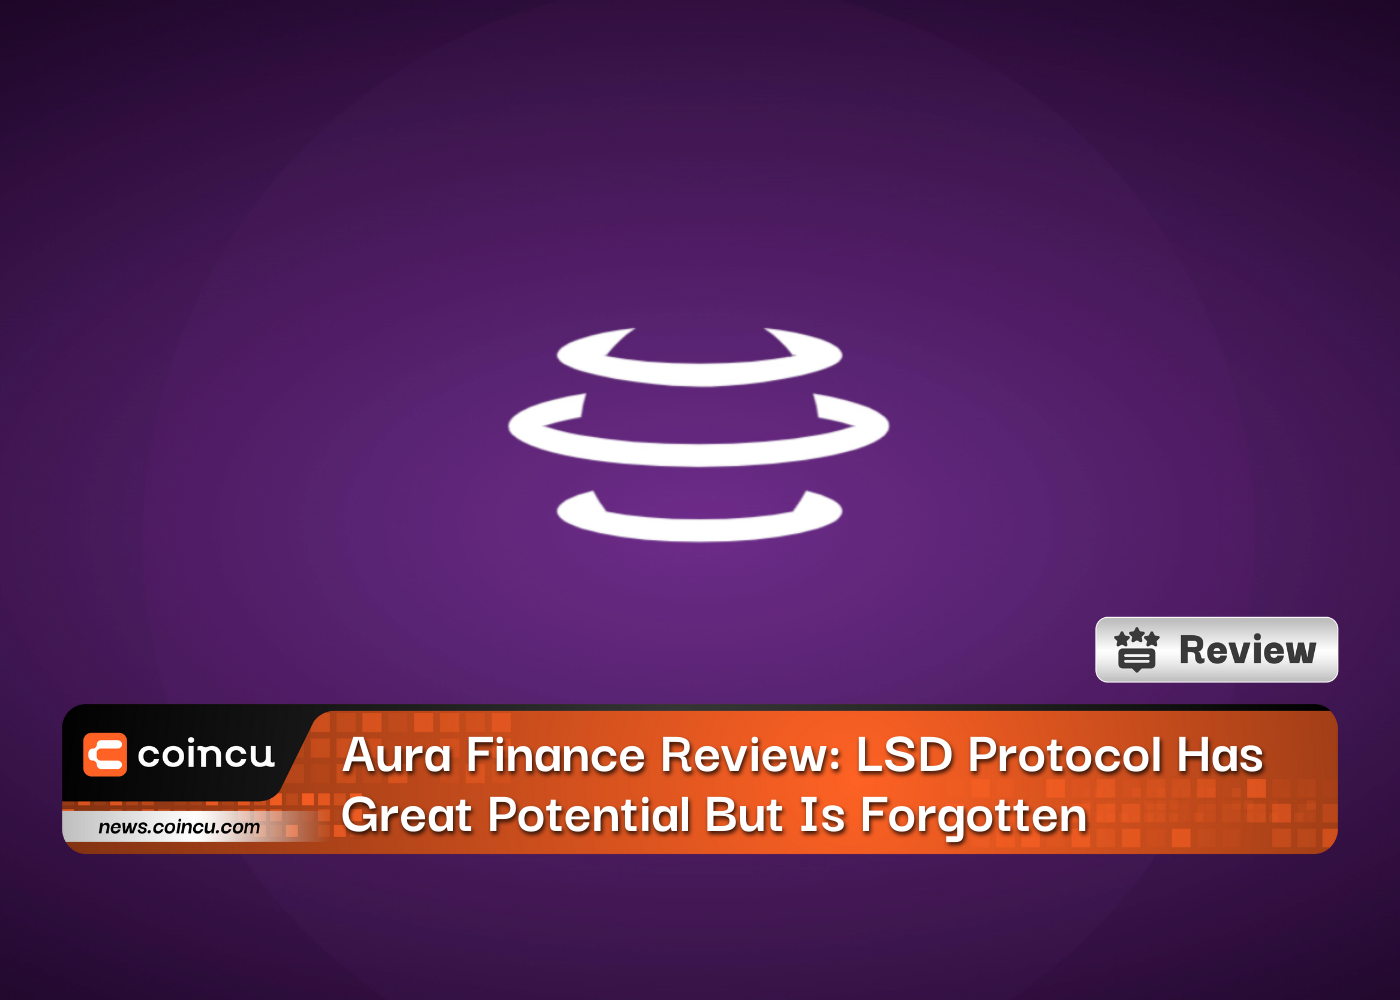 Aura Finance Review: LSD Protocol Has Great Potential But Is Forgotten